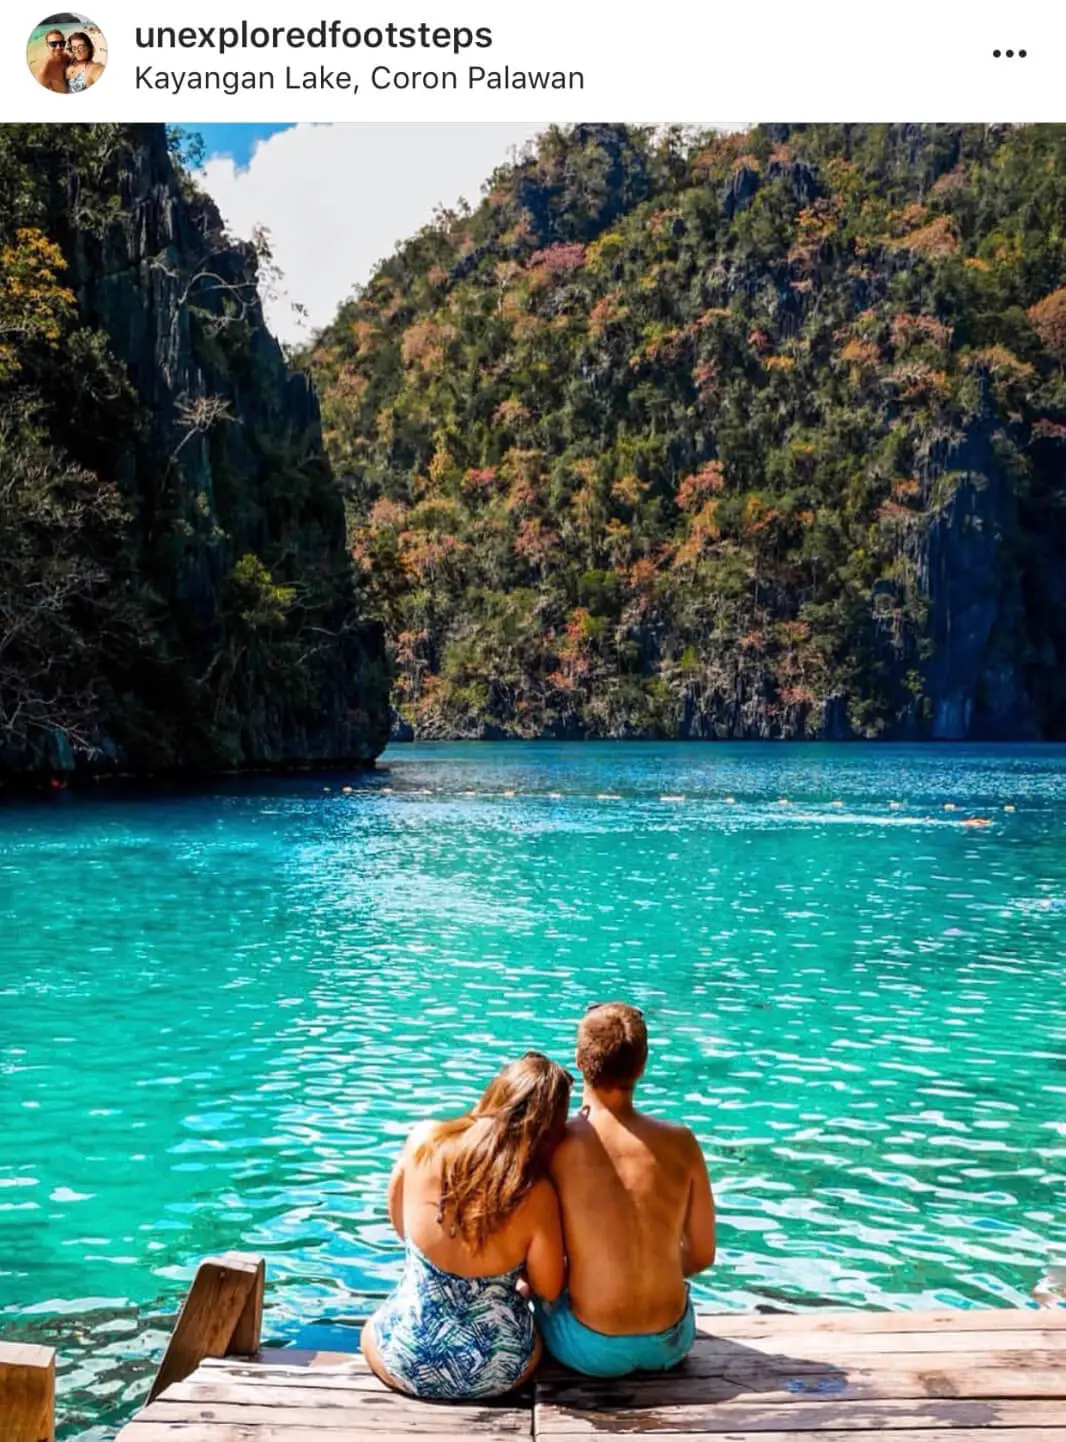 The Top 20 Instagram locations in the Philippines, kayangan lake